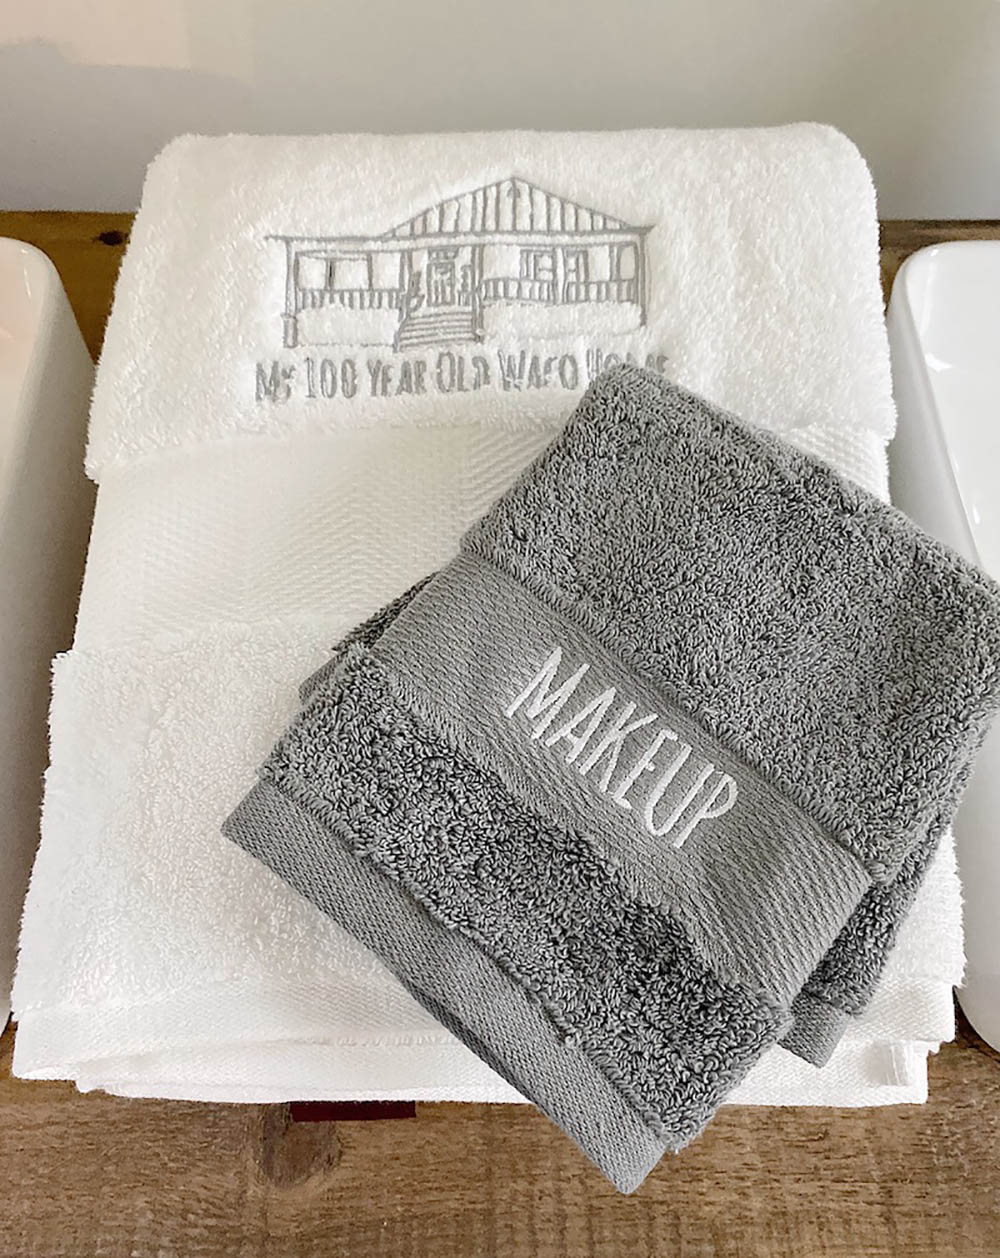 A gray washcloth with the word makeup embroidered on it sits on top of a white personalized hand towel.